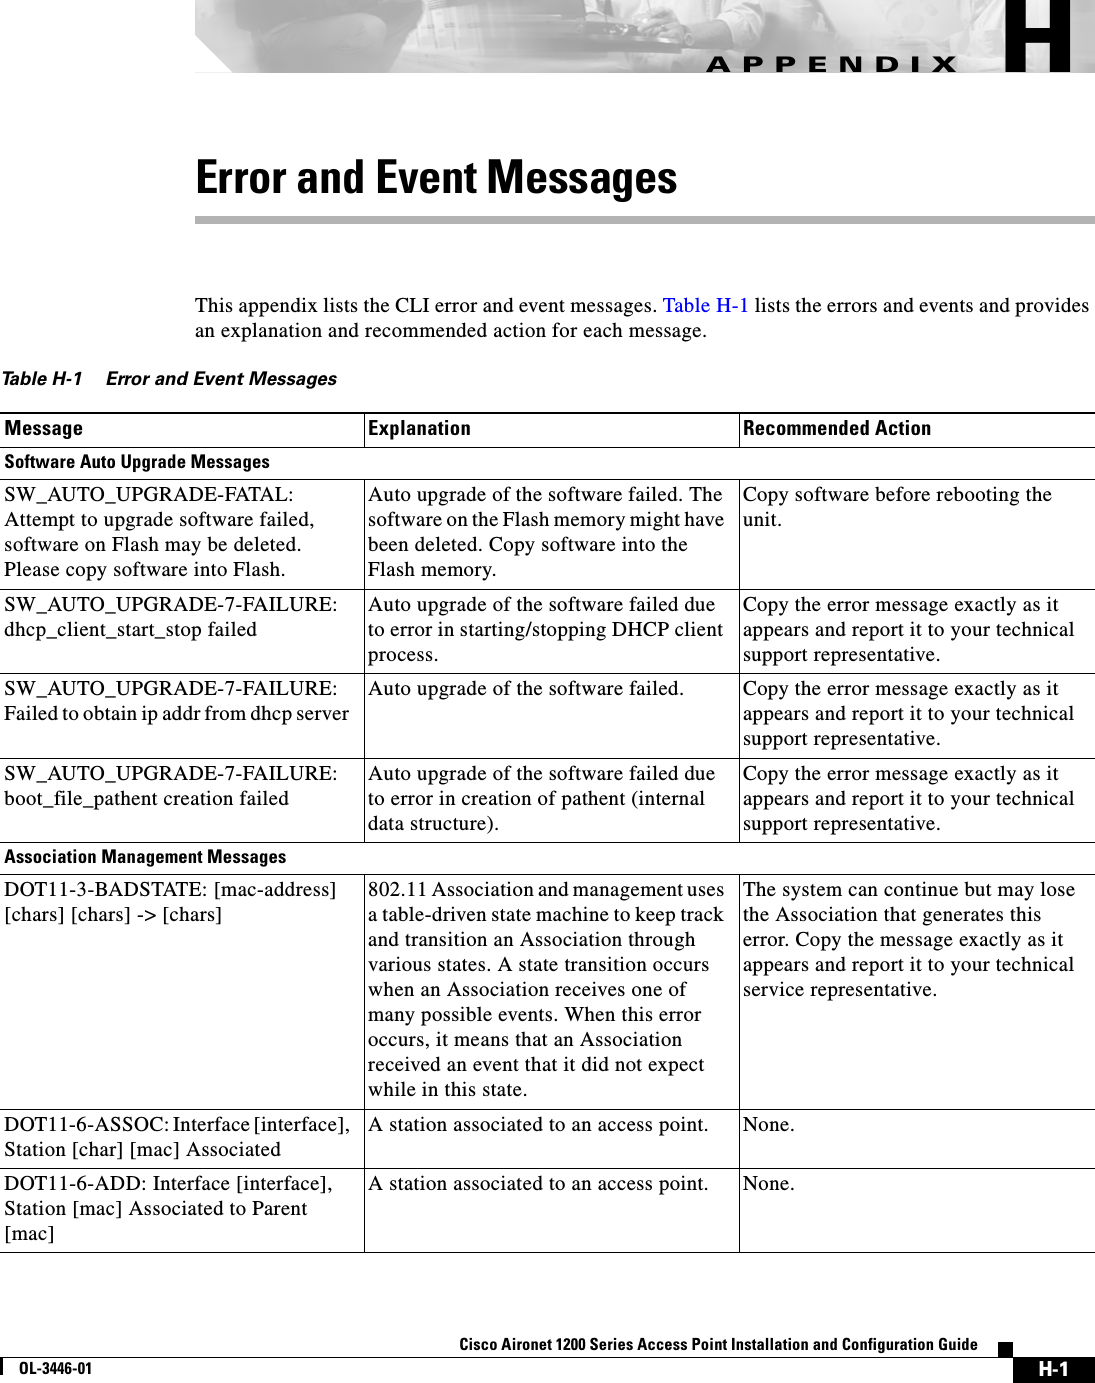 H-1Cisco Aironet 1200 Series Access Point Installation and Configuration GuideOL-3446-01APPENDIXHError and Event MessagesThis appendix lists the CLI error and event messages. Table H-1 lists the errors and events and provides an explanation and recommended action for each message.Table H-1 Error and Event MessagesMessage Explanation Recommended ActionSoftware Auto Upgrade MessagesSW_AUTO_UPGRADE-FATAL: Attempt to upgrade software failed, software on Flash may be deleted. Please copy software into Flash. Auto upgrade of the software failed. The software on the Flash memory might have been deleted. Copy software into the Flash memory. Copy software before rebooting the unit. SW_AUTO_UPGRADE-7-FAILURE: dhcp_client_start_stop failed Auto upgrade of the software failed due to error in starting/stopping DHCP client process.Copy the error message exactly as it appears and report it to your technical support representative. SW_AUTO_UPGRADE-7-FAILURE: Failed to obtain ip addr from dhcp server Auto upgrade of the software failed. Copy the error message exactly as it appears and report it to your technical support representative.SW_AUTO_UPGRADE-7-FAILURE: boot_file_pathent creation failed Auto upgrade of the software failed due to error in creation of pathent (internal data structure).Copy the error message exactly as it appears and report it to your technical support representative.Association Management MessagesDOT11-3-BADSTATE: [mac-address] [chars] [chars] -&gt; [chars]802.11 Association and management uses a table-driven state machine to keep track and transition an Association through various states. A state transition occurs when an Association receives one of many possible events. When this error occurs, it means that an Association received an event that it did not expect while in this state.The system can continue but may lose the Association that generates this error. Copy the message exactly as it appears and report it to your technical service representative.DOT11-6-ASSOC: Interface [interface], Station [char] [mac] AssociatedA station associated to an access point. None.DOT11-6-ADD: Interface [interface], Station [mac] Associated to Parent [mac]A station associated to an access point. None.